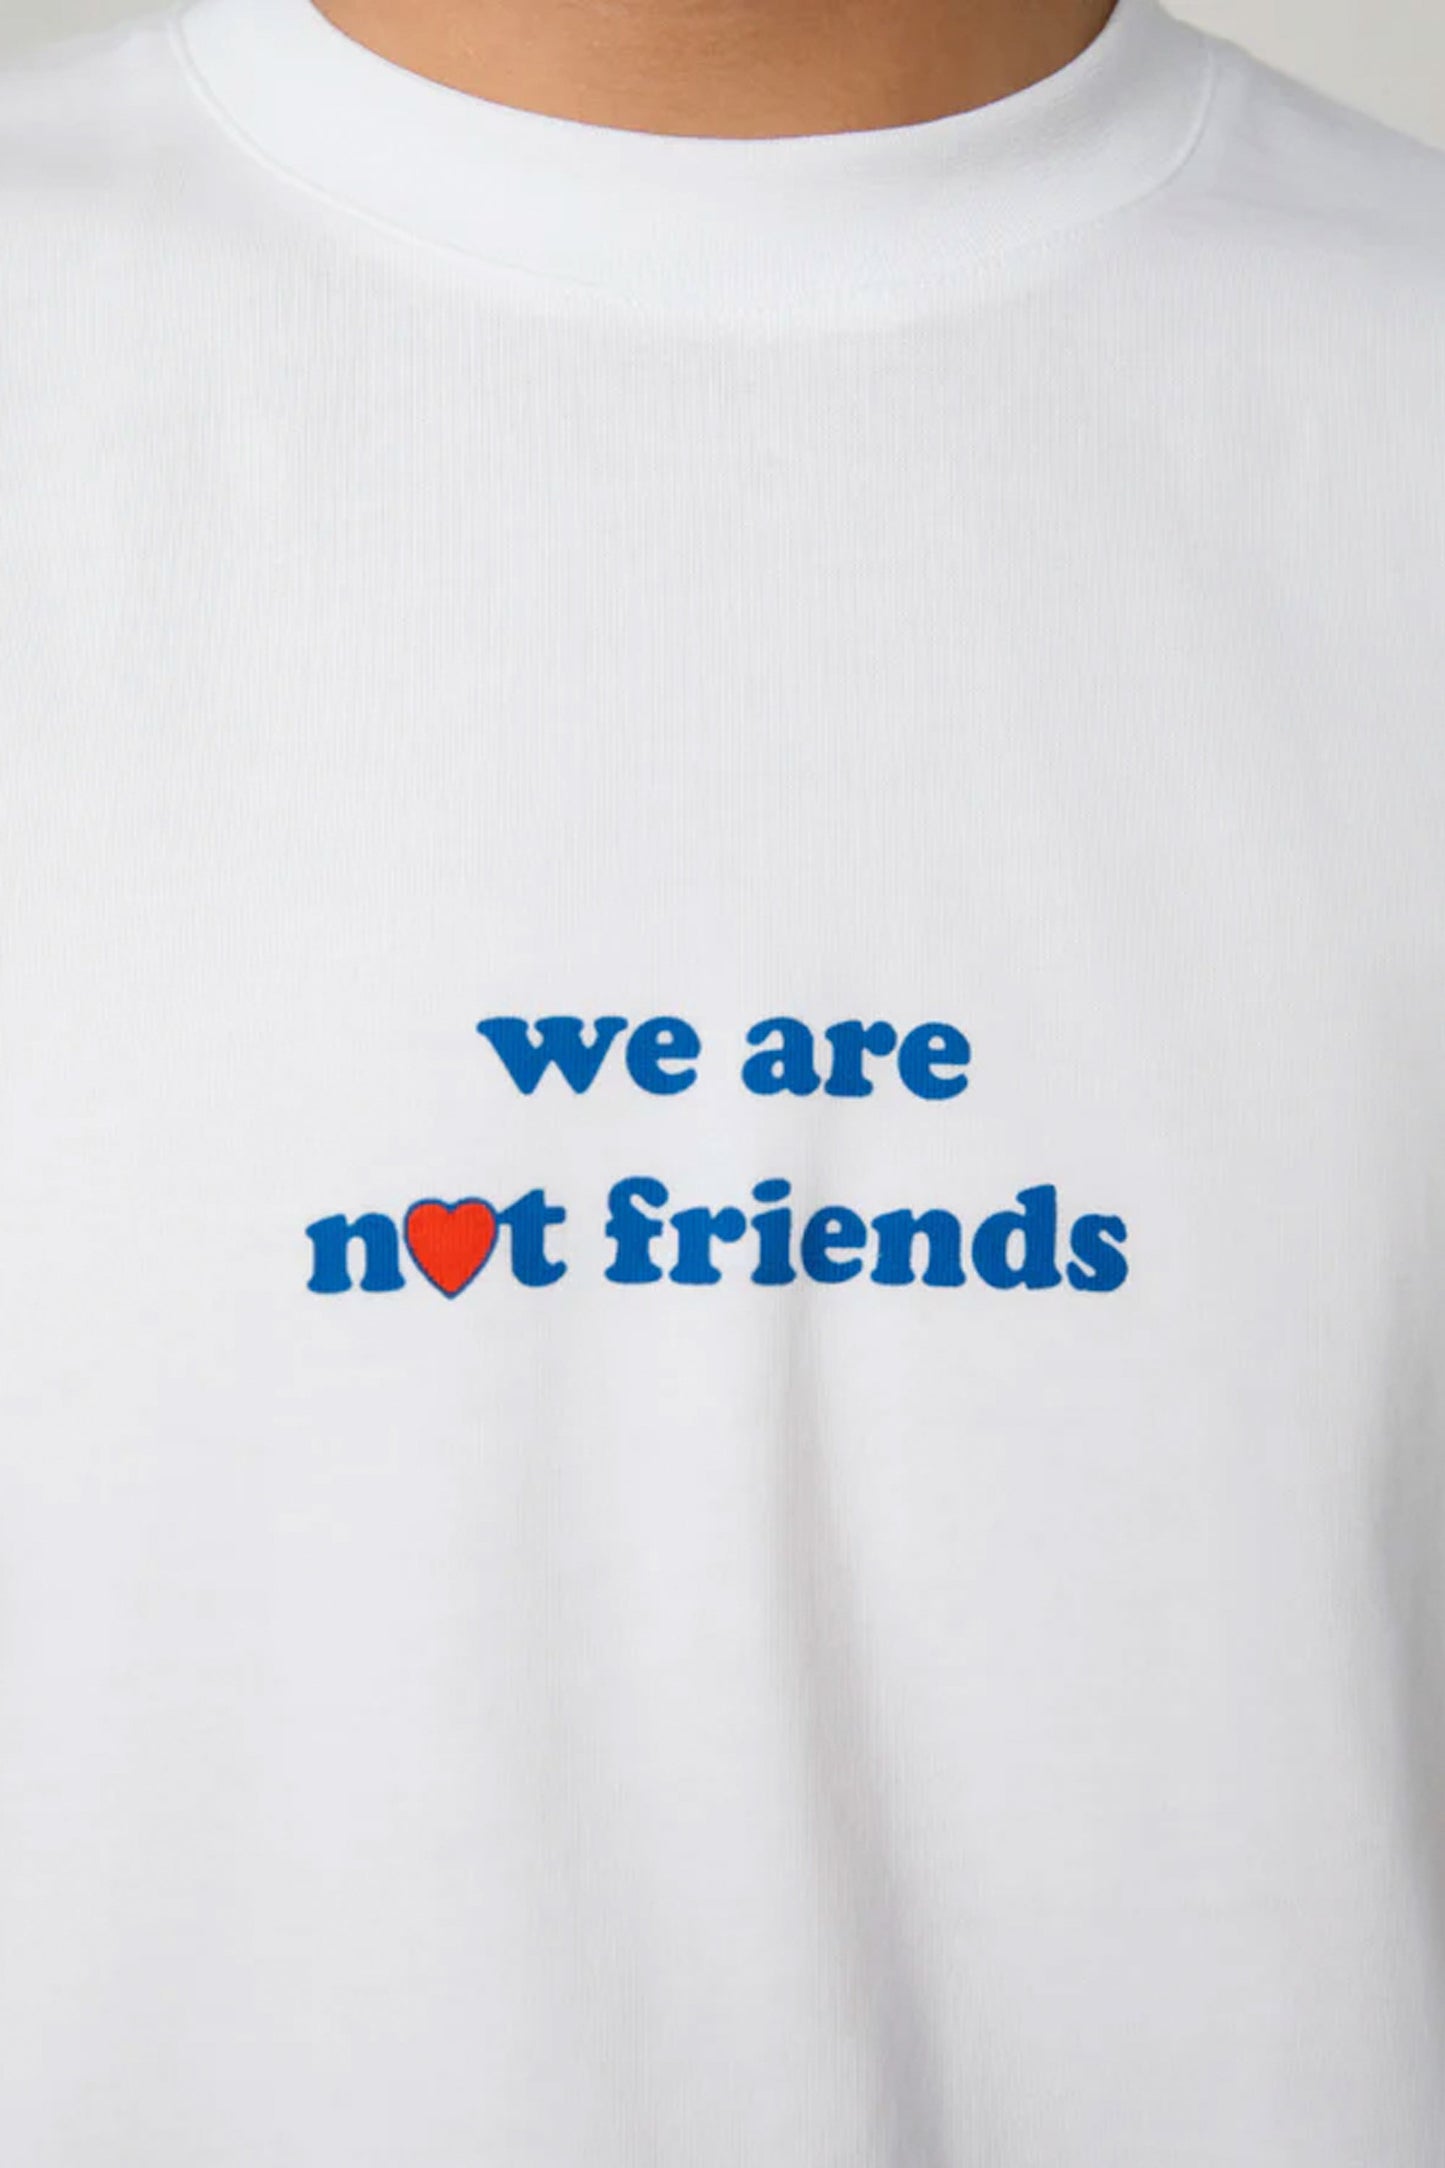 
                  
                    PUKAS-SURF-SHOP-TEE-WE-ARE-NOT-FRIENDS-ROUND-HEARTS
                  
                